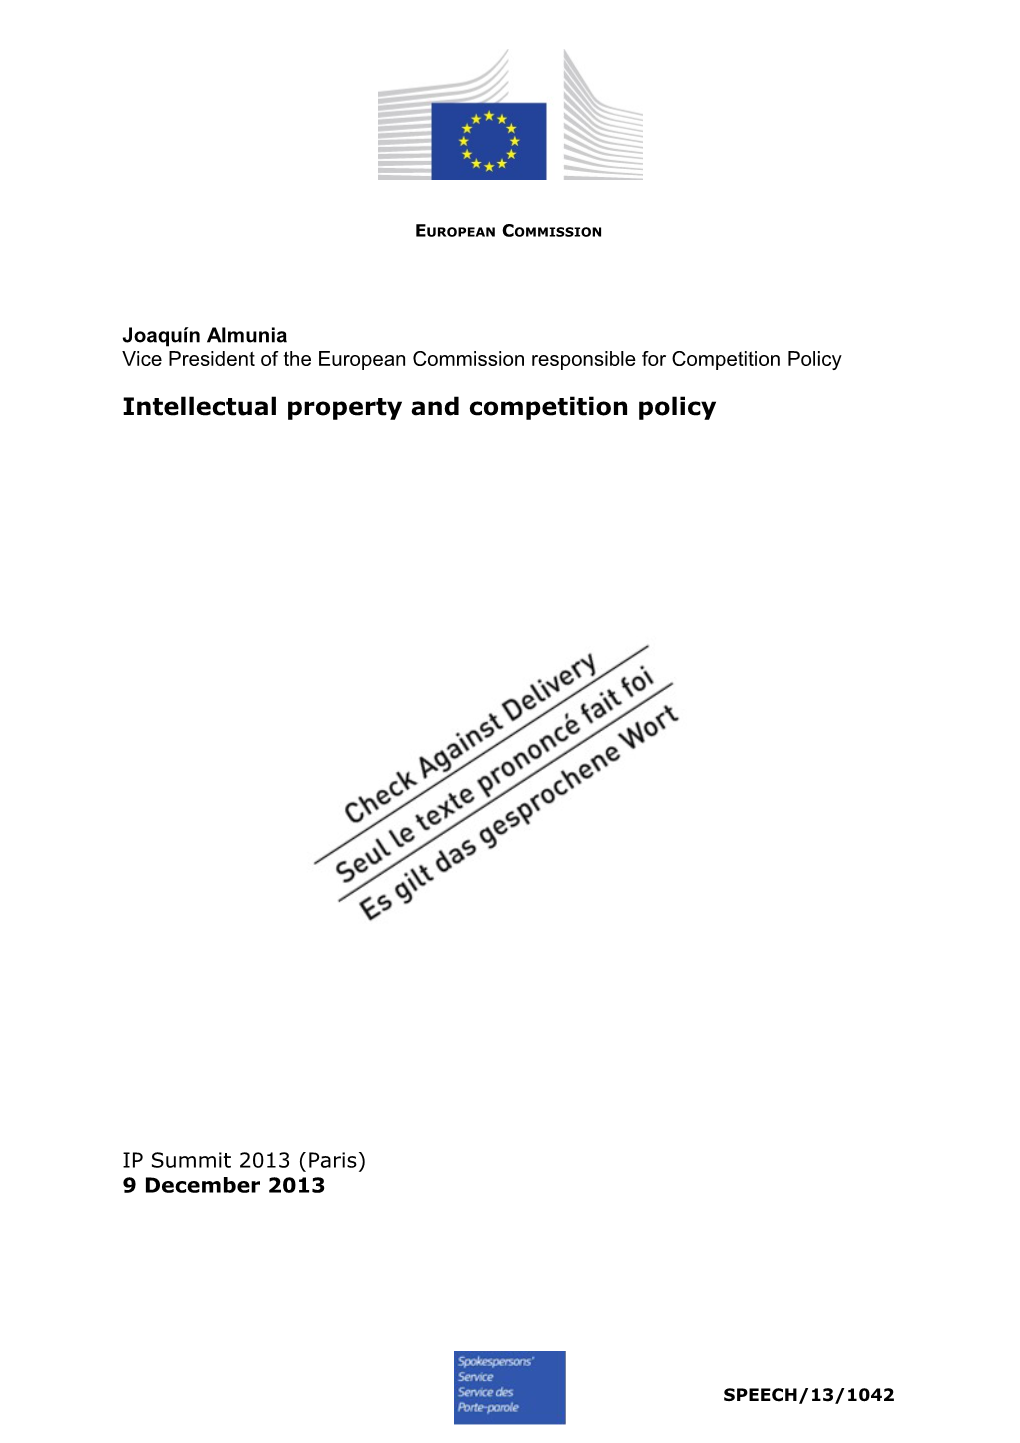 Intellectual Property and Competition Policy